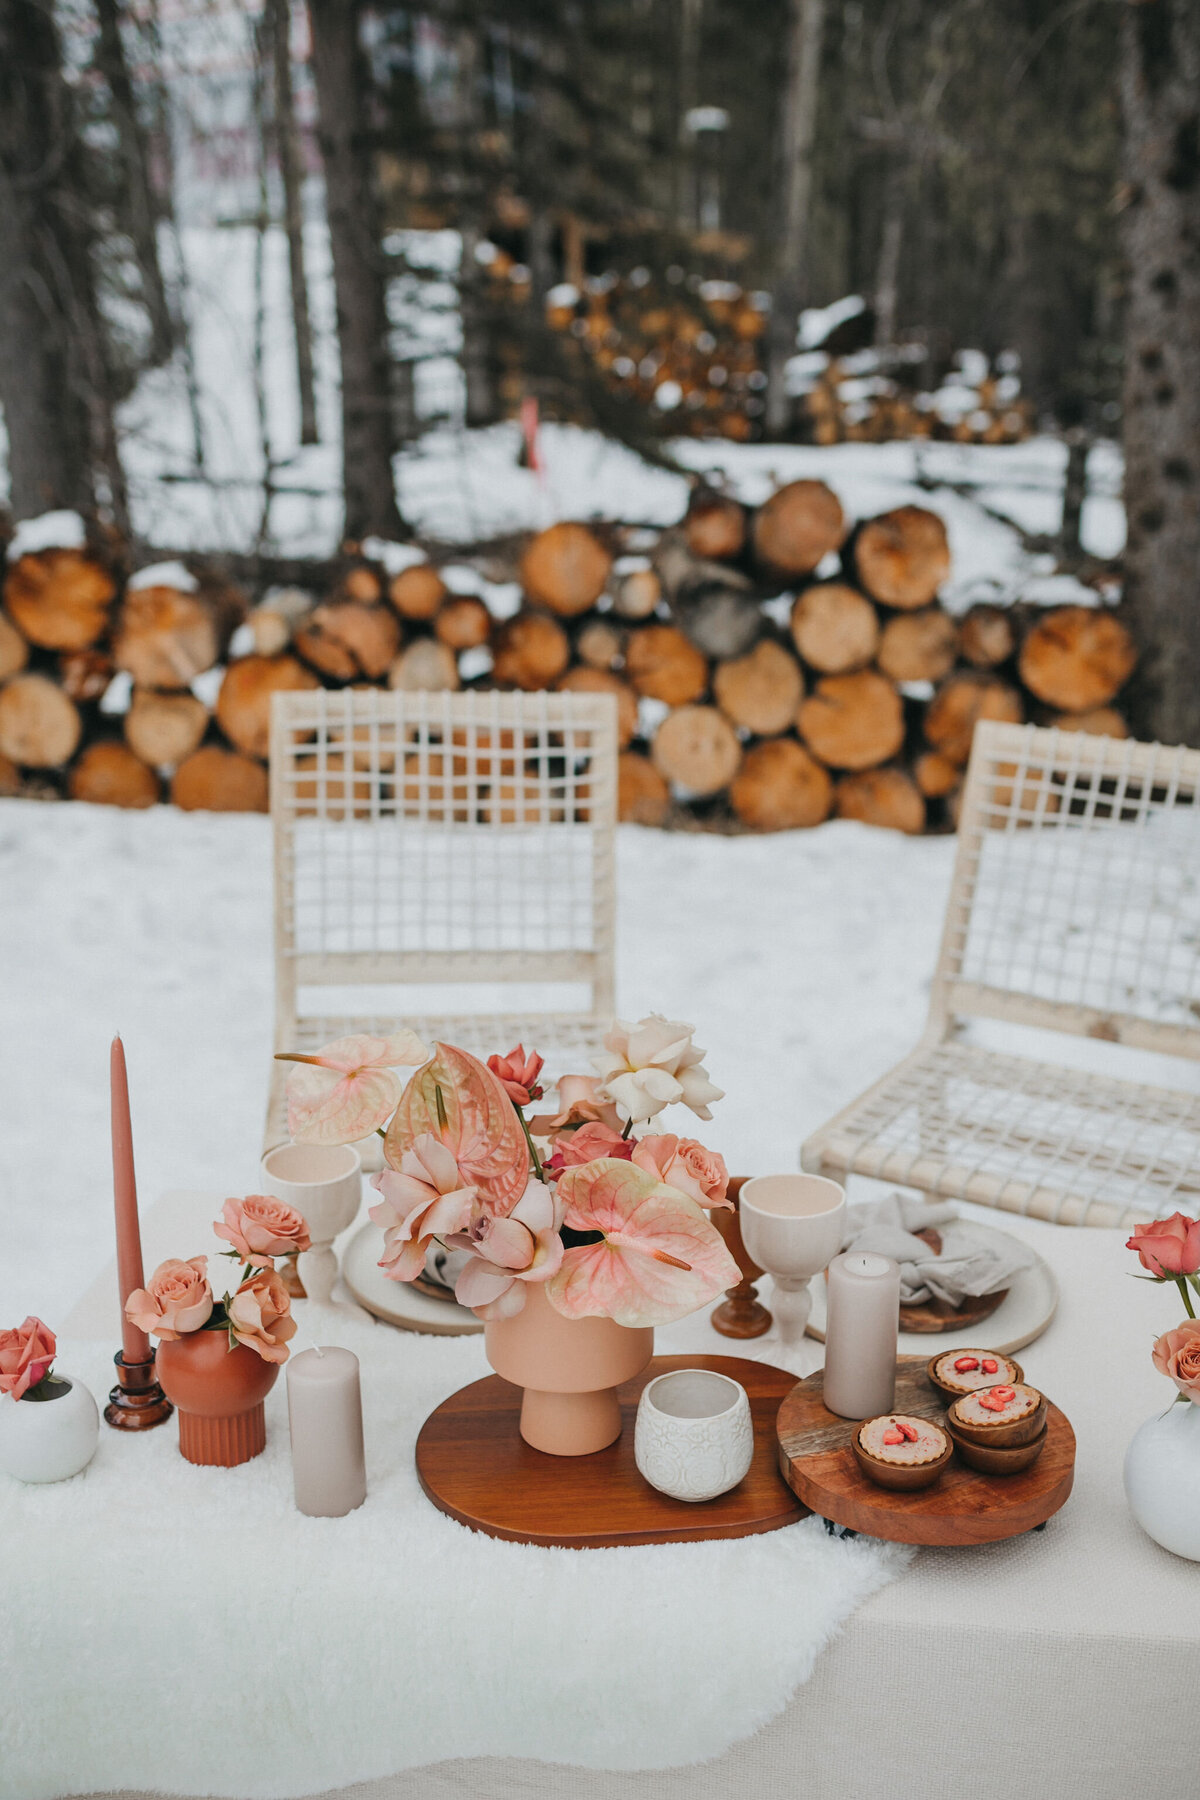 Rebekah Brontë Designs - One-of-a-kind High End Wedding Design that’s Creative, Bold, & Meaningful to You - Intimate Alberta Elopement Design, photo by Kadie Hummel